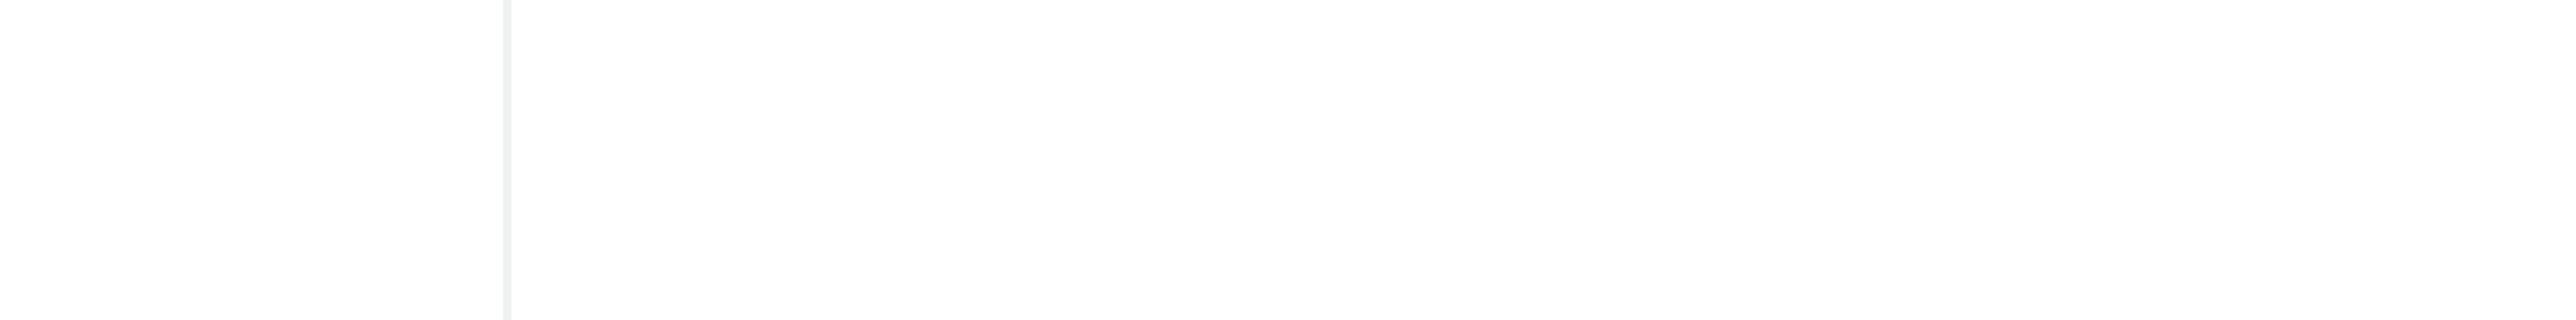 Productboard Product Excellence white logo